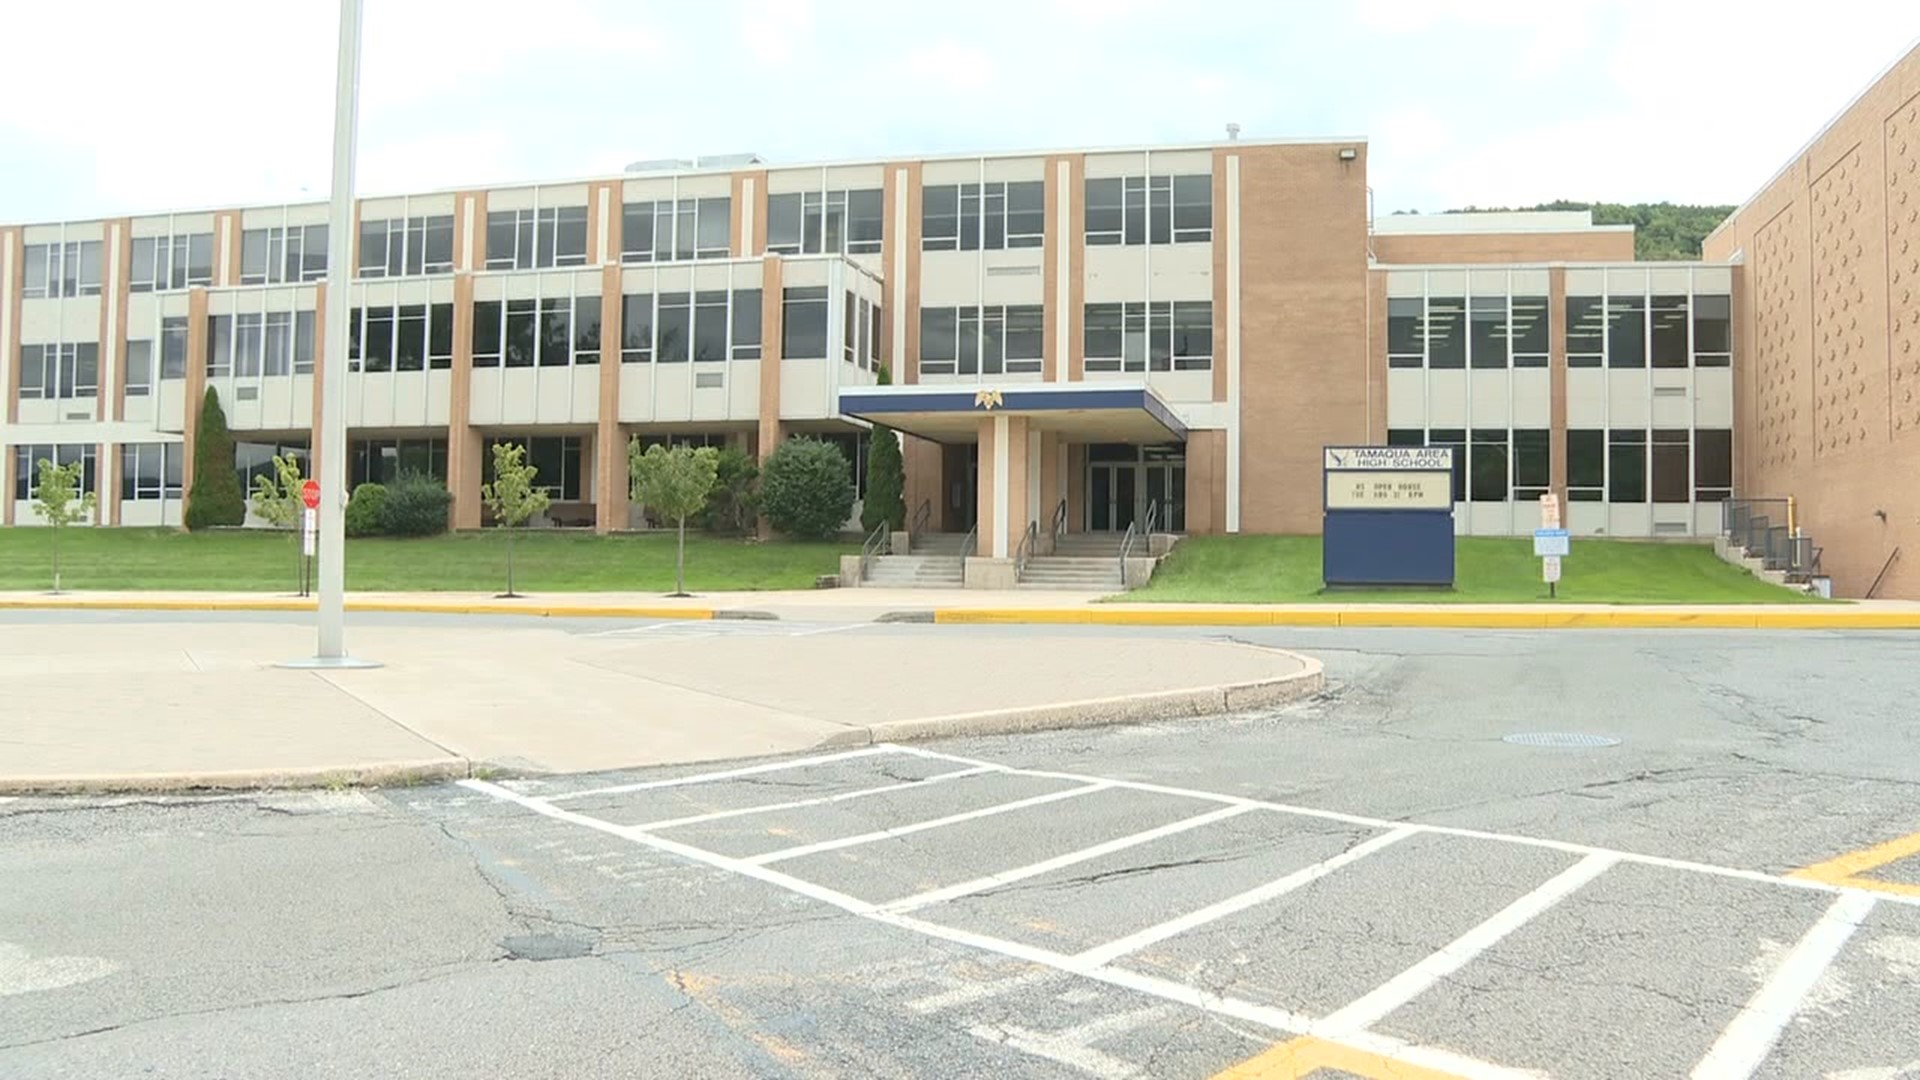 The Schuylkill County school district will begin adhering to the state mandate on October 4.